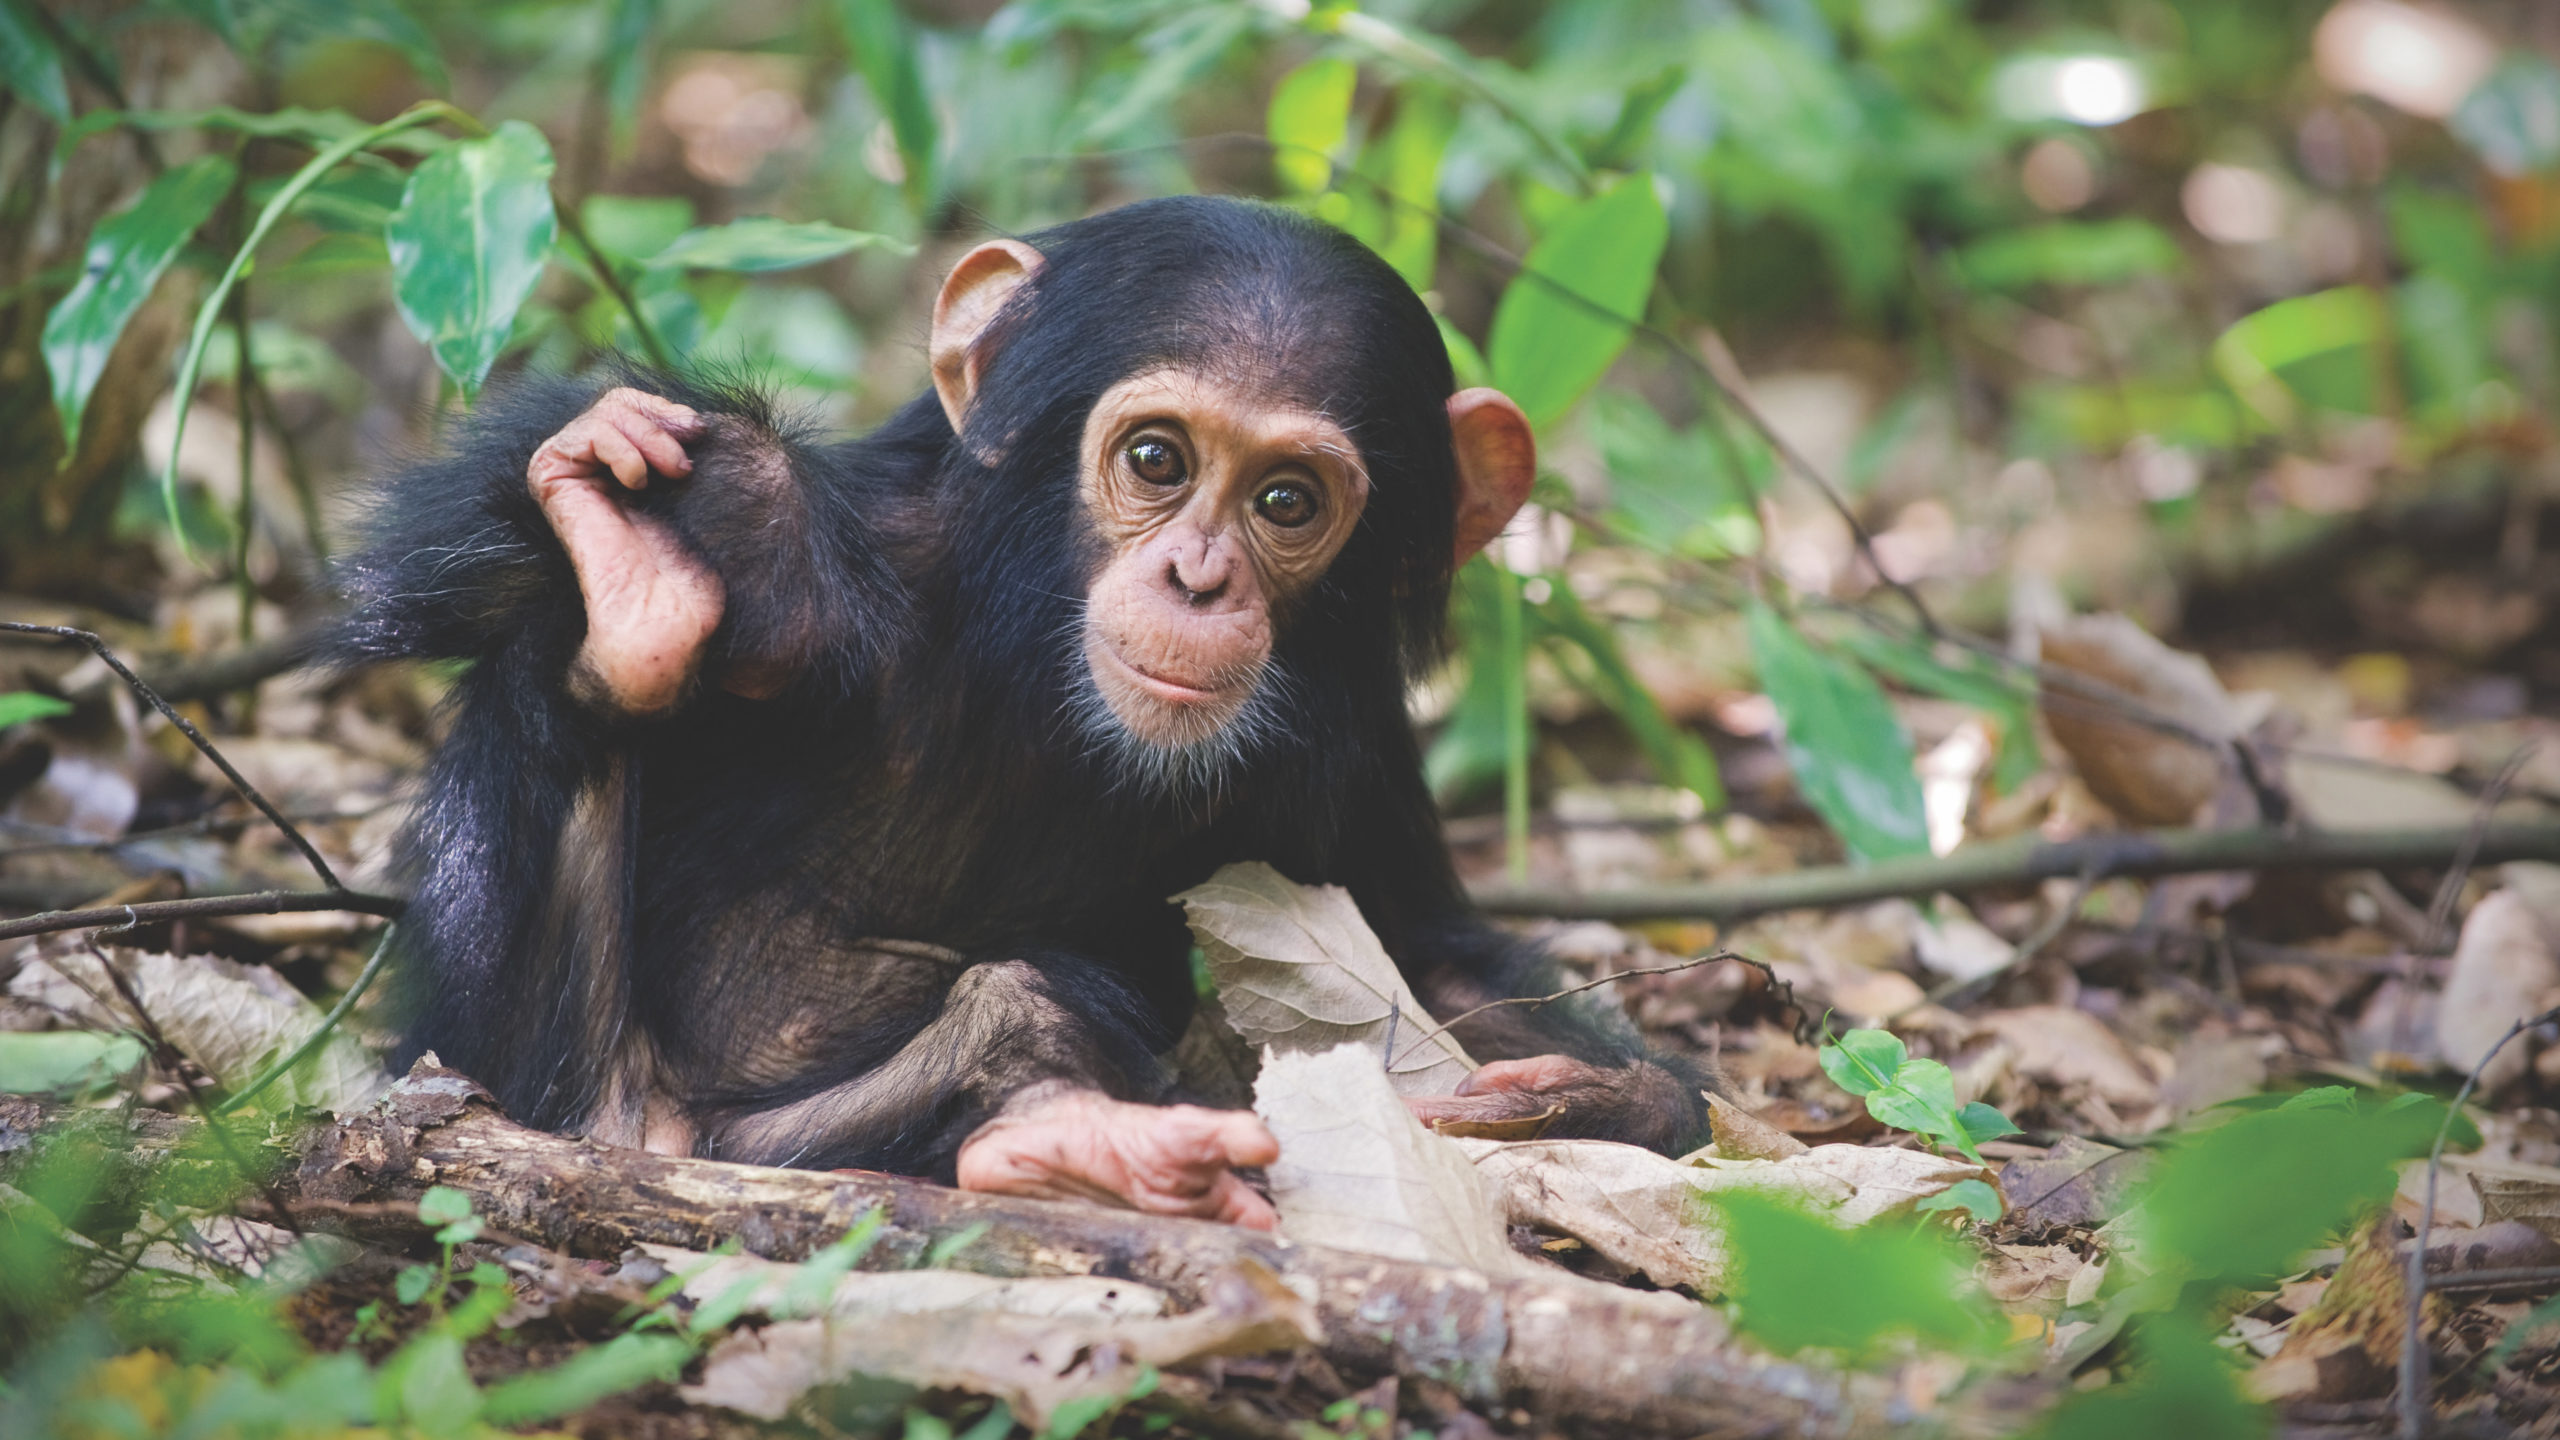 This chimpanzee is about a year old and lives in Uganda's Kibale National Park. (Photo: Suzi Eszterhas/New On Earth: Baby Animals in the Wild/courtesy of Earth Aware Editions)